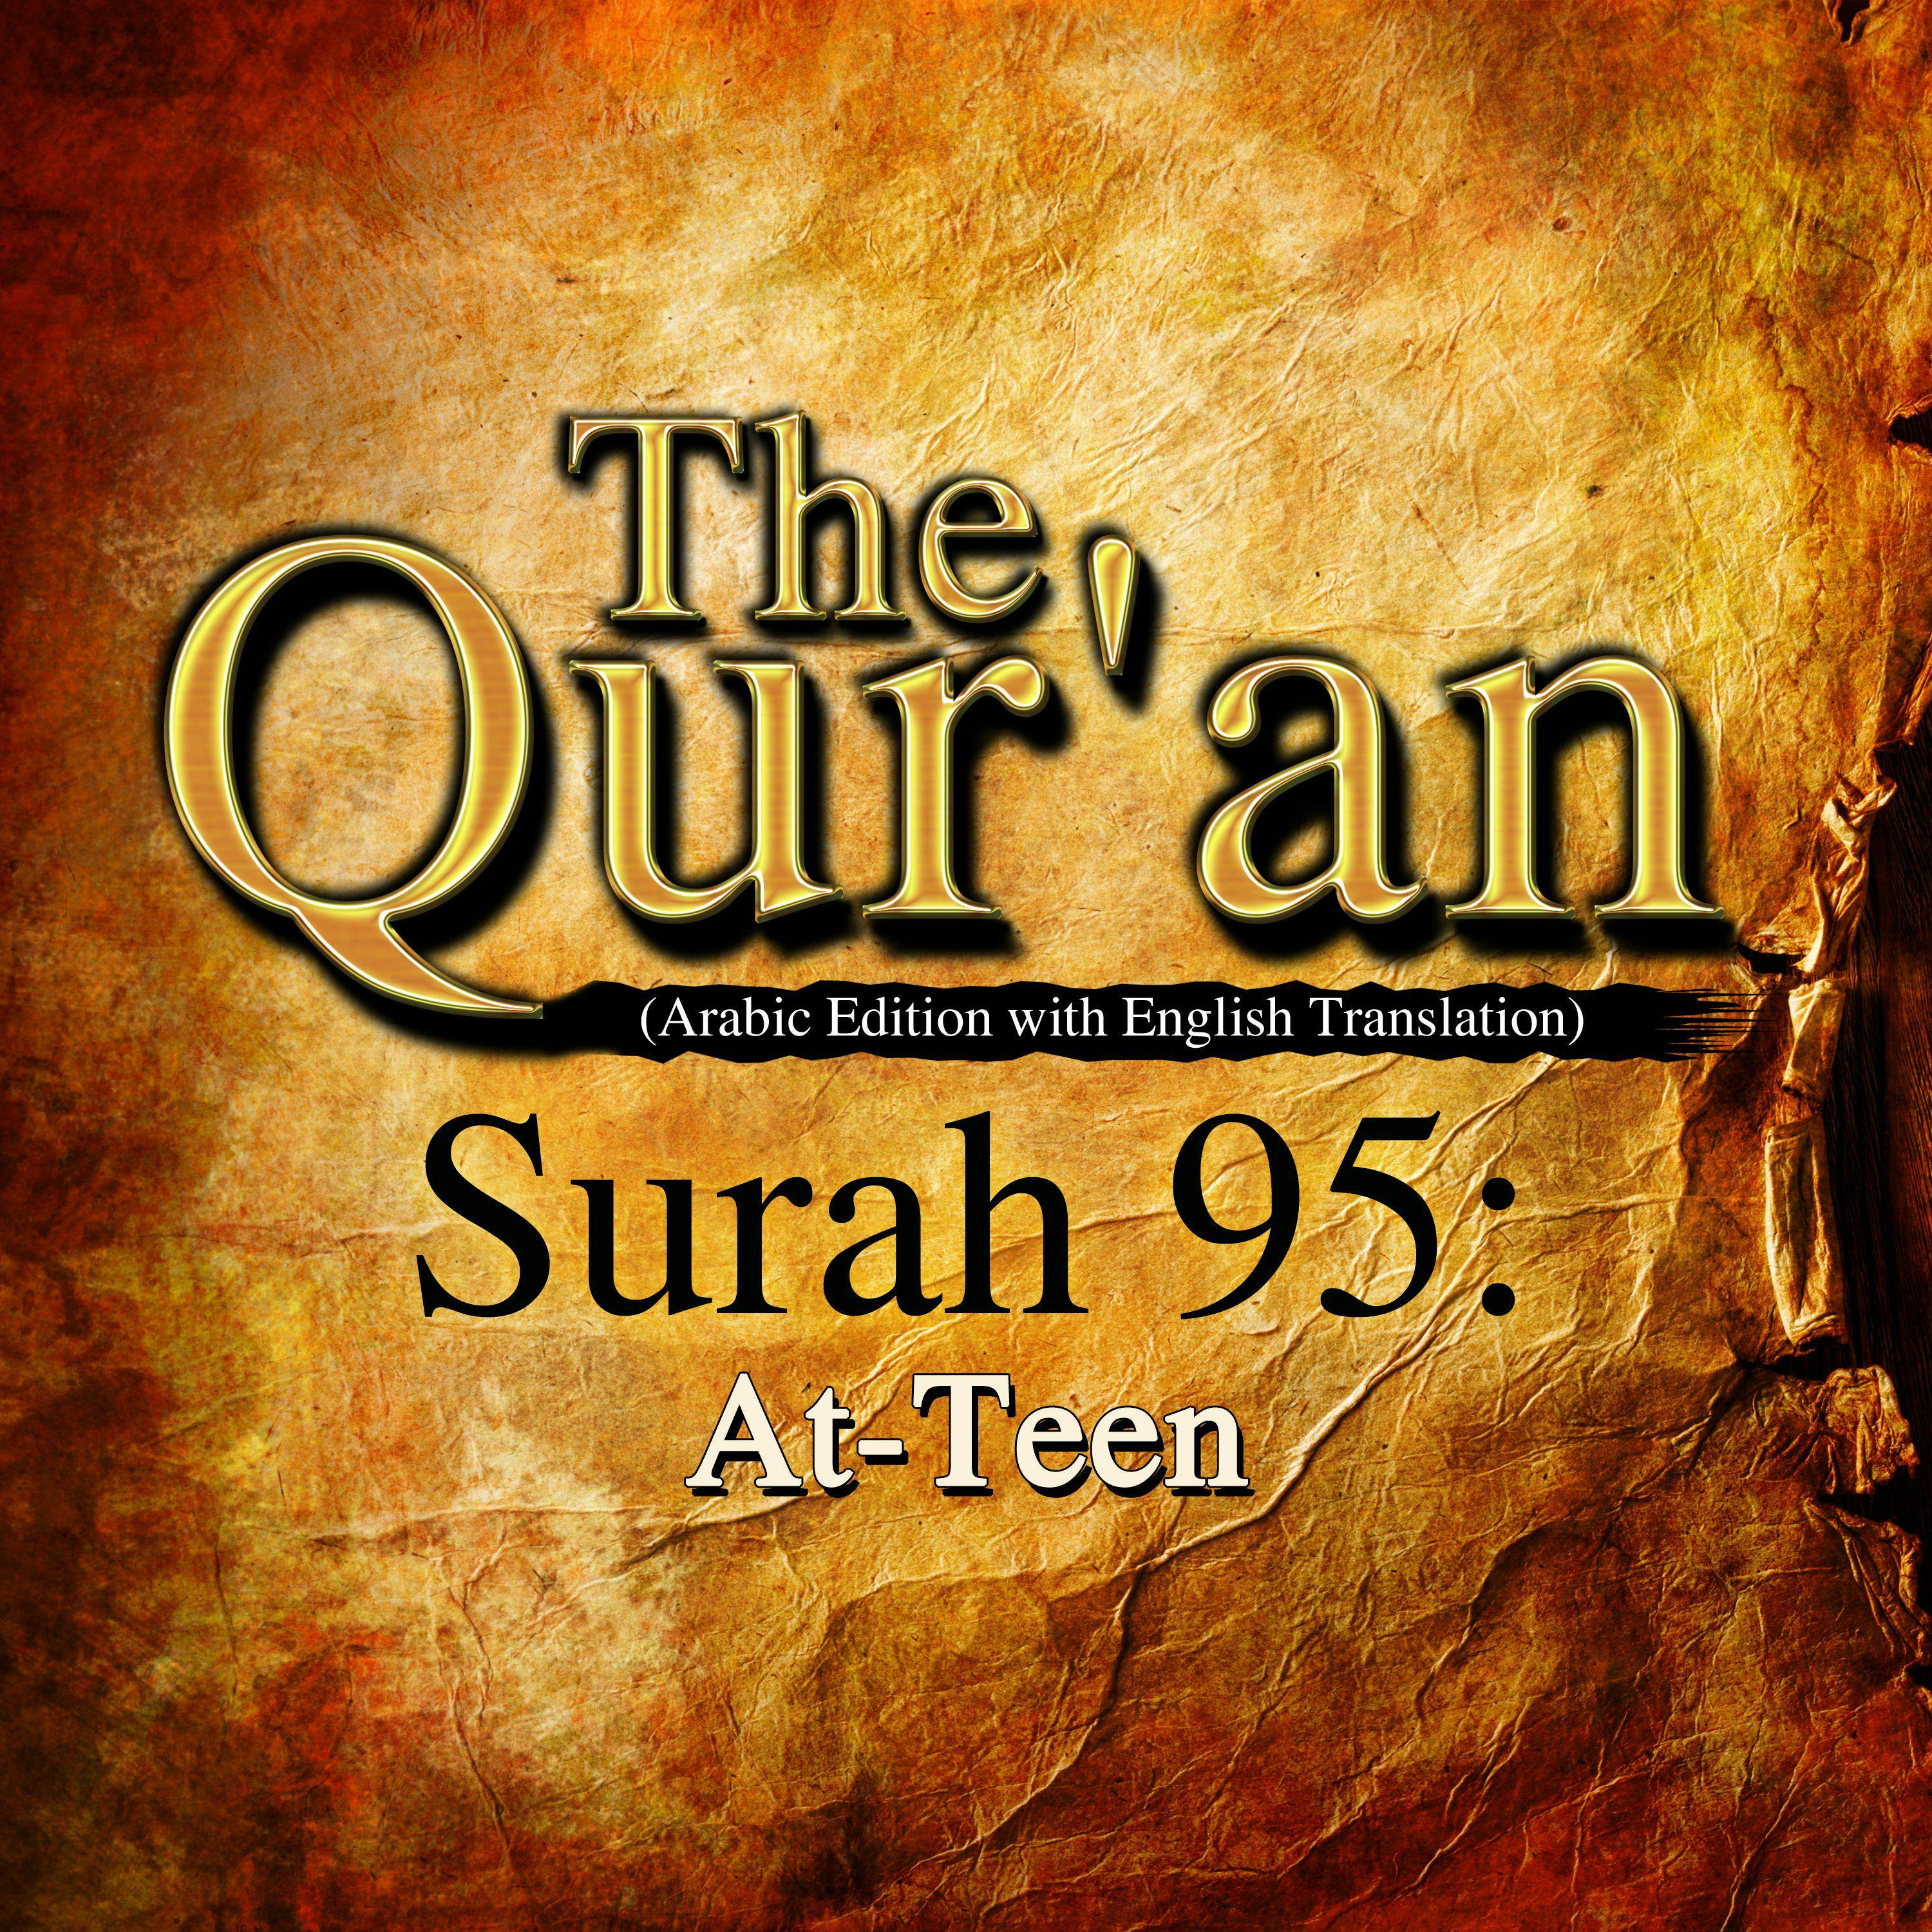 The Qur'an: Surah 95: At-Teen - undefined